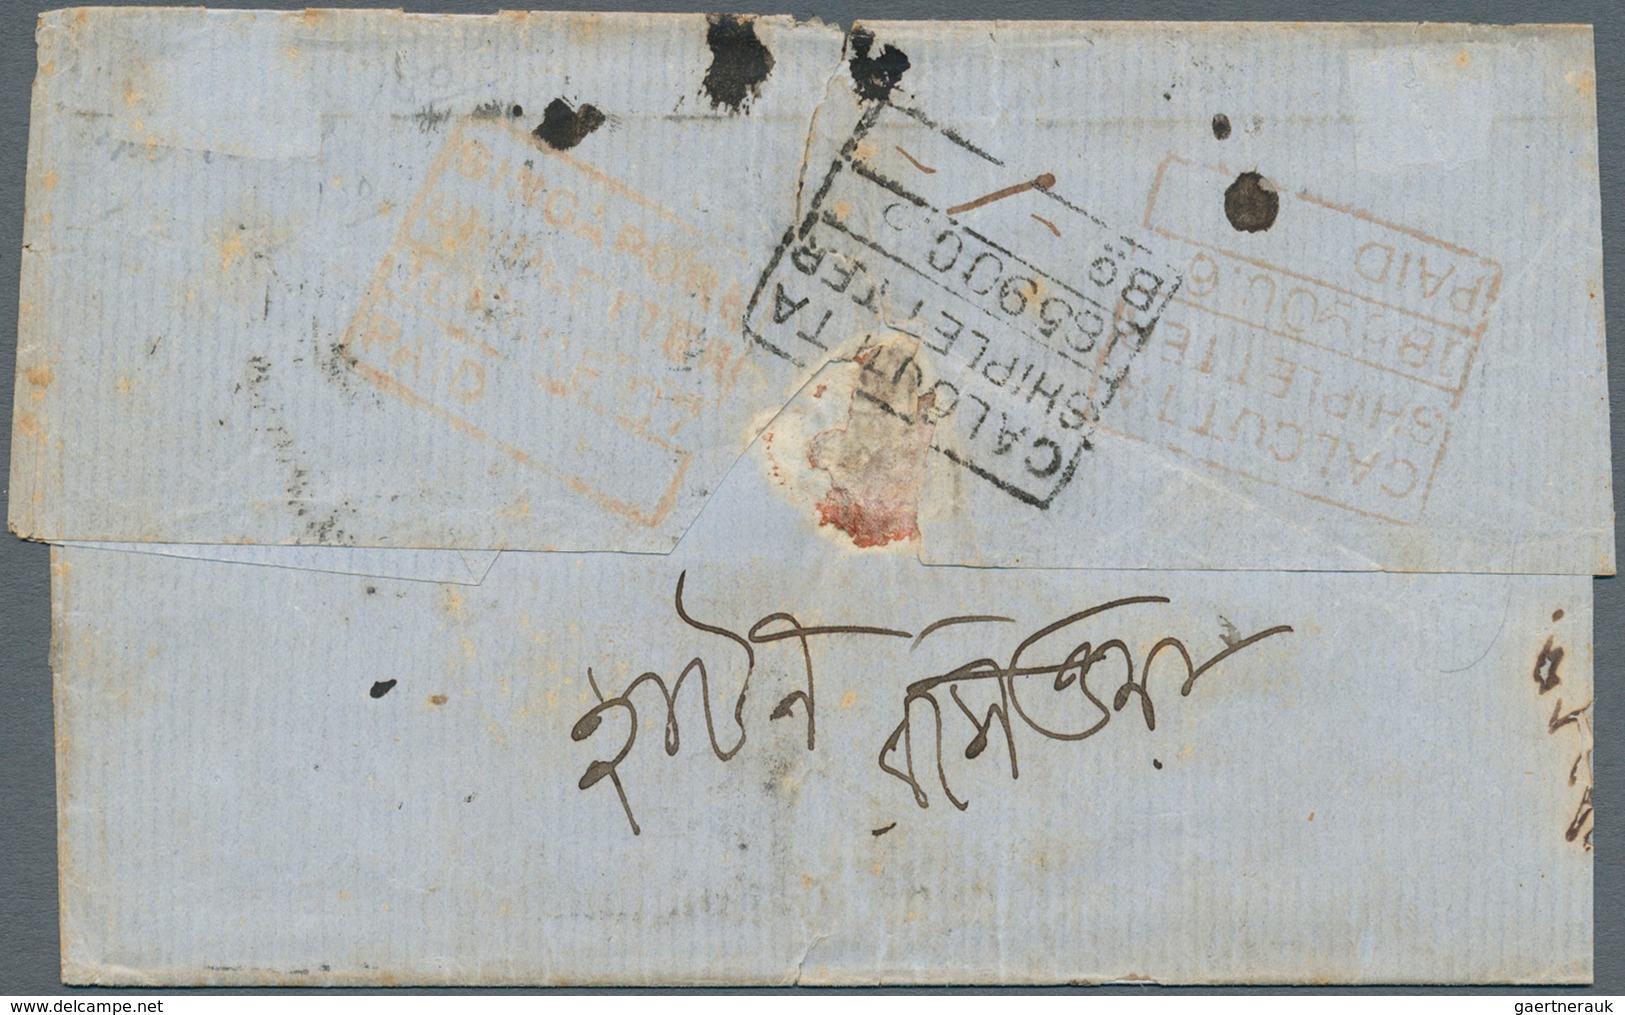 Singapur: 1859. Envelope Addressed To Calcutta Bearing India SG 46. 4a Black Tied By "B/172" Obliter - Singapore (...-1959)